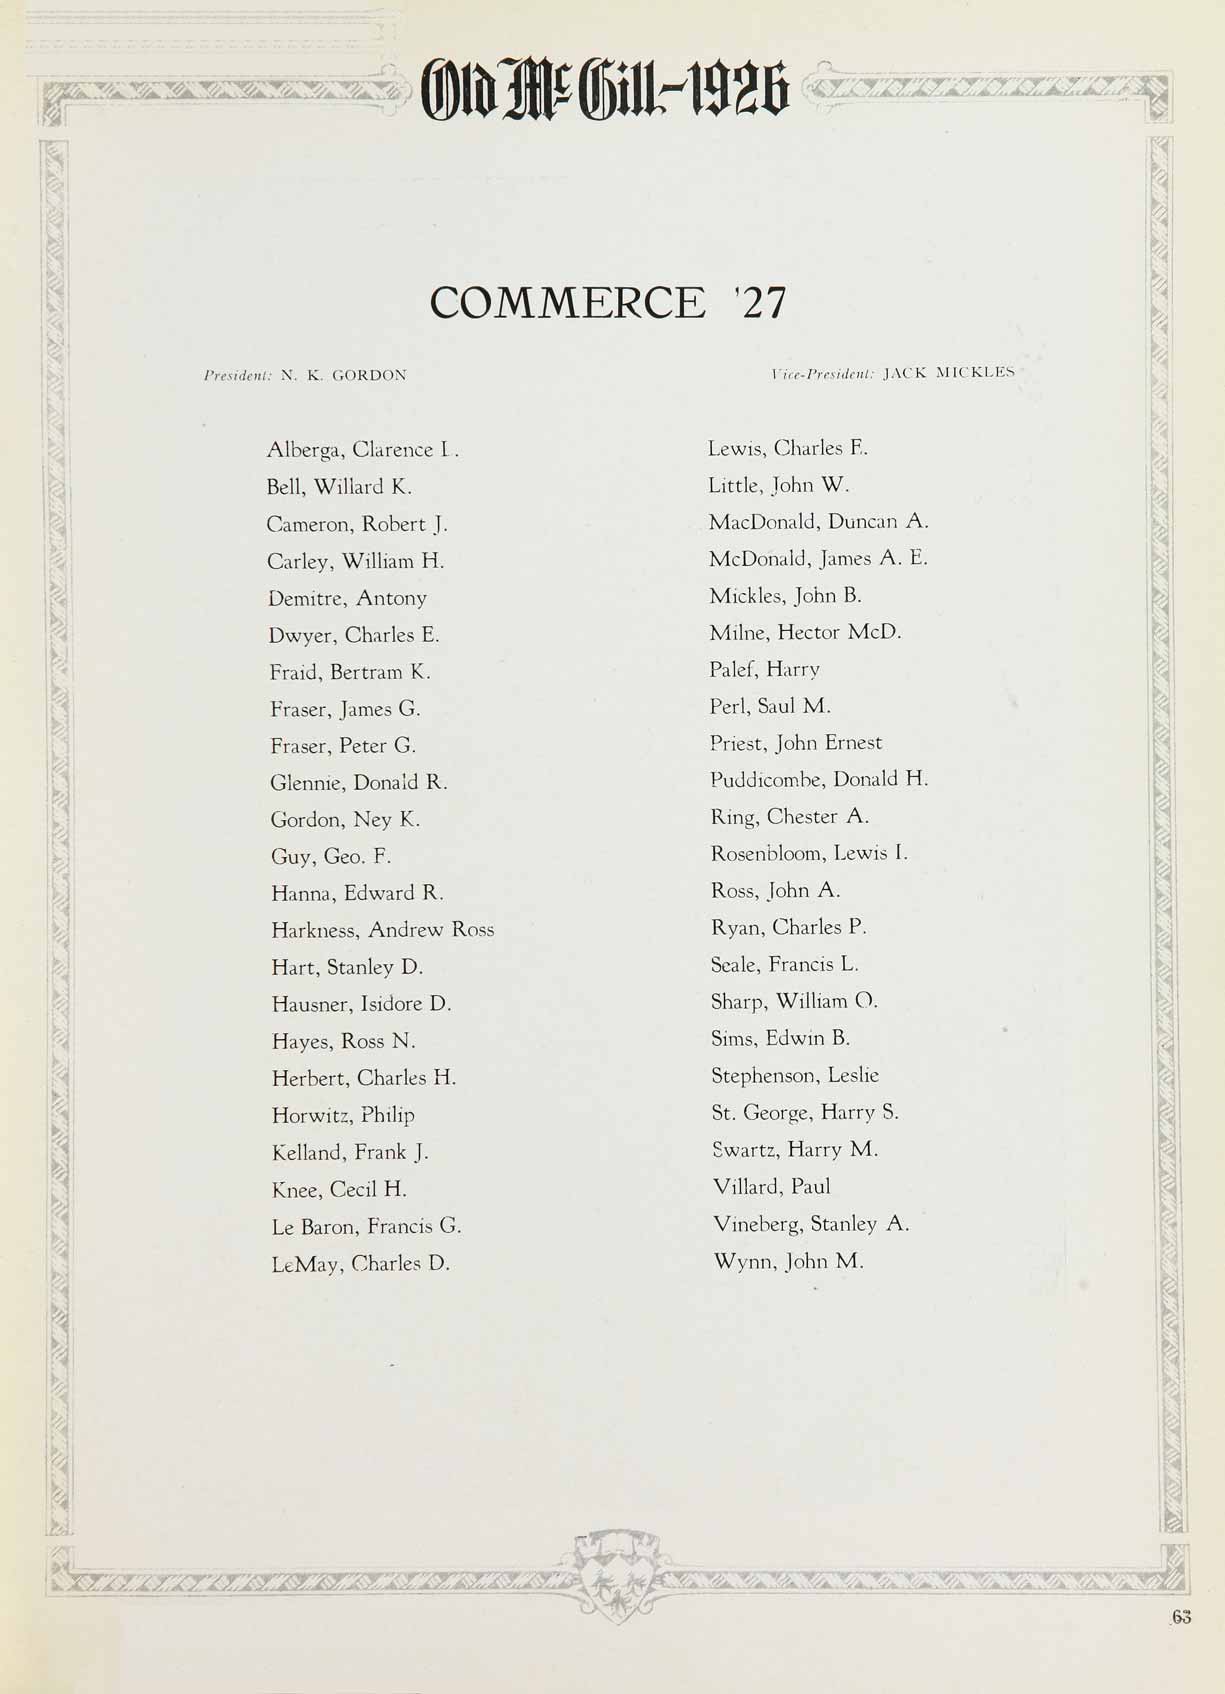 McGill Yearbook: 1926